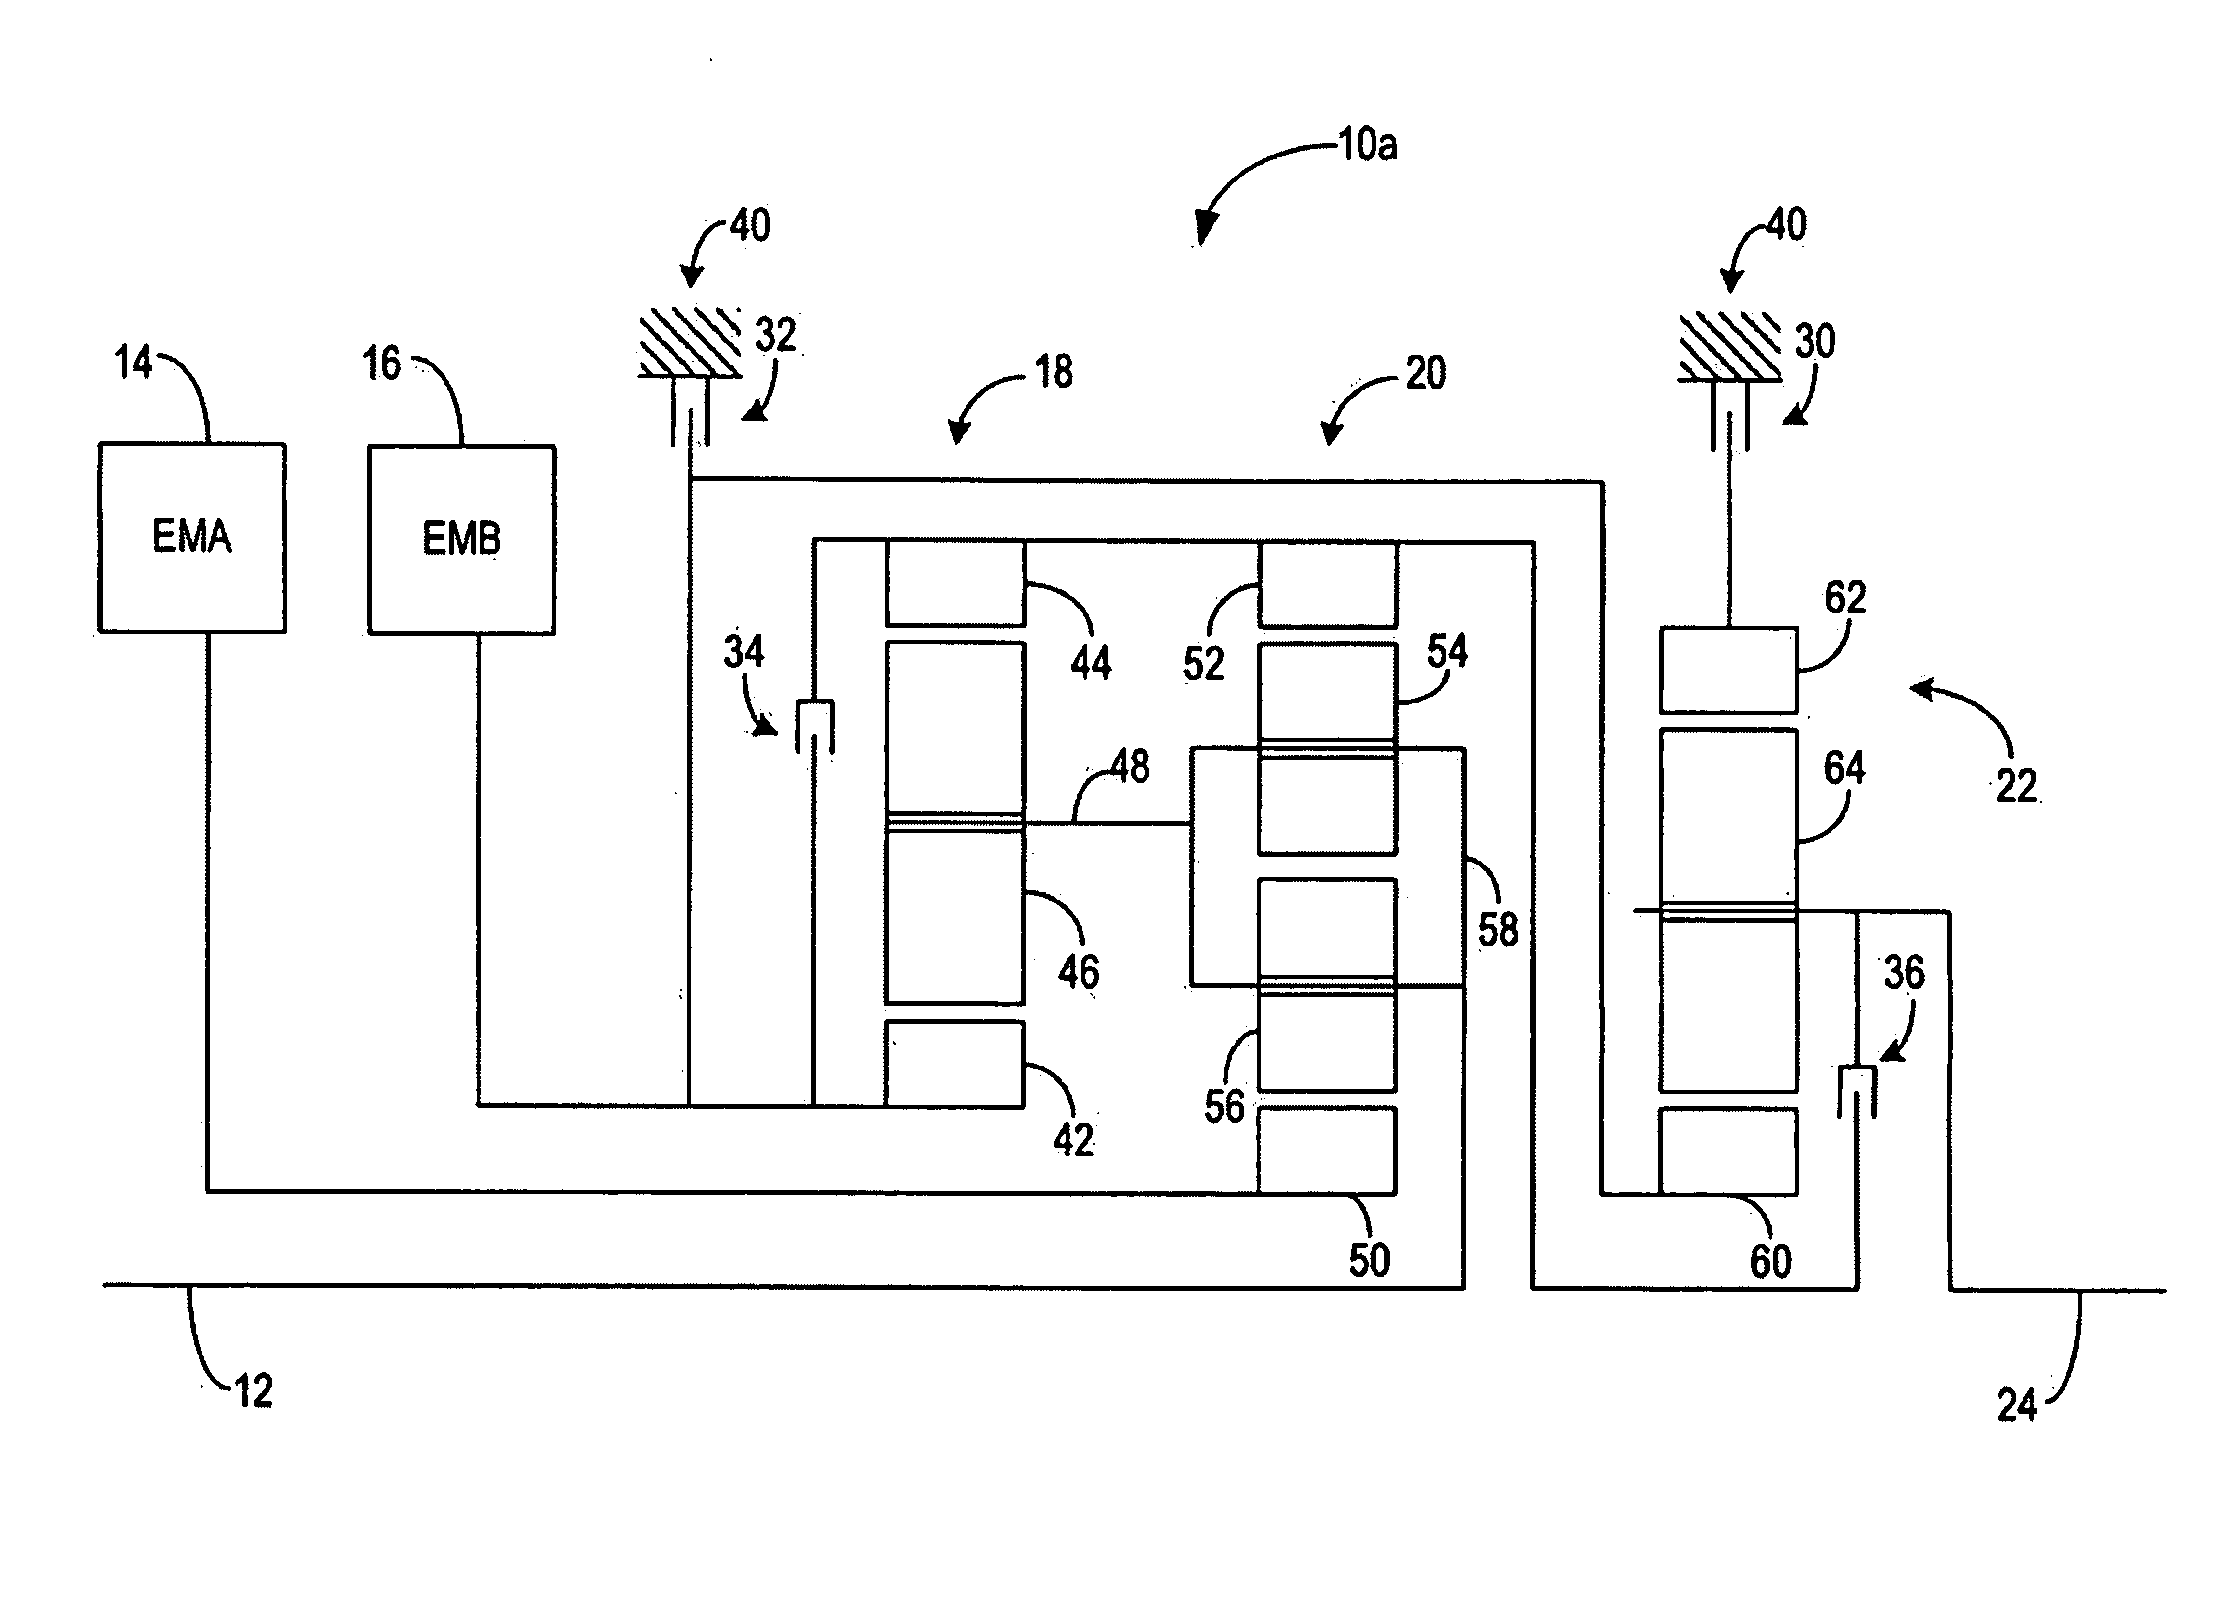 Electric variable transmission for hybrid electric vehicles with two forward modes and four fixed gears